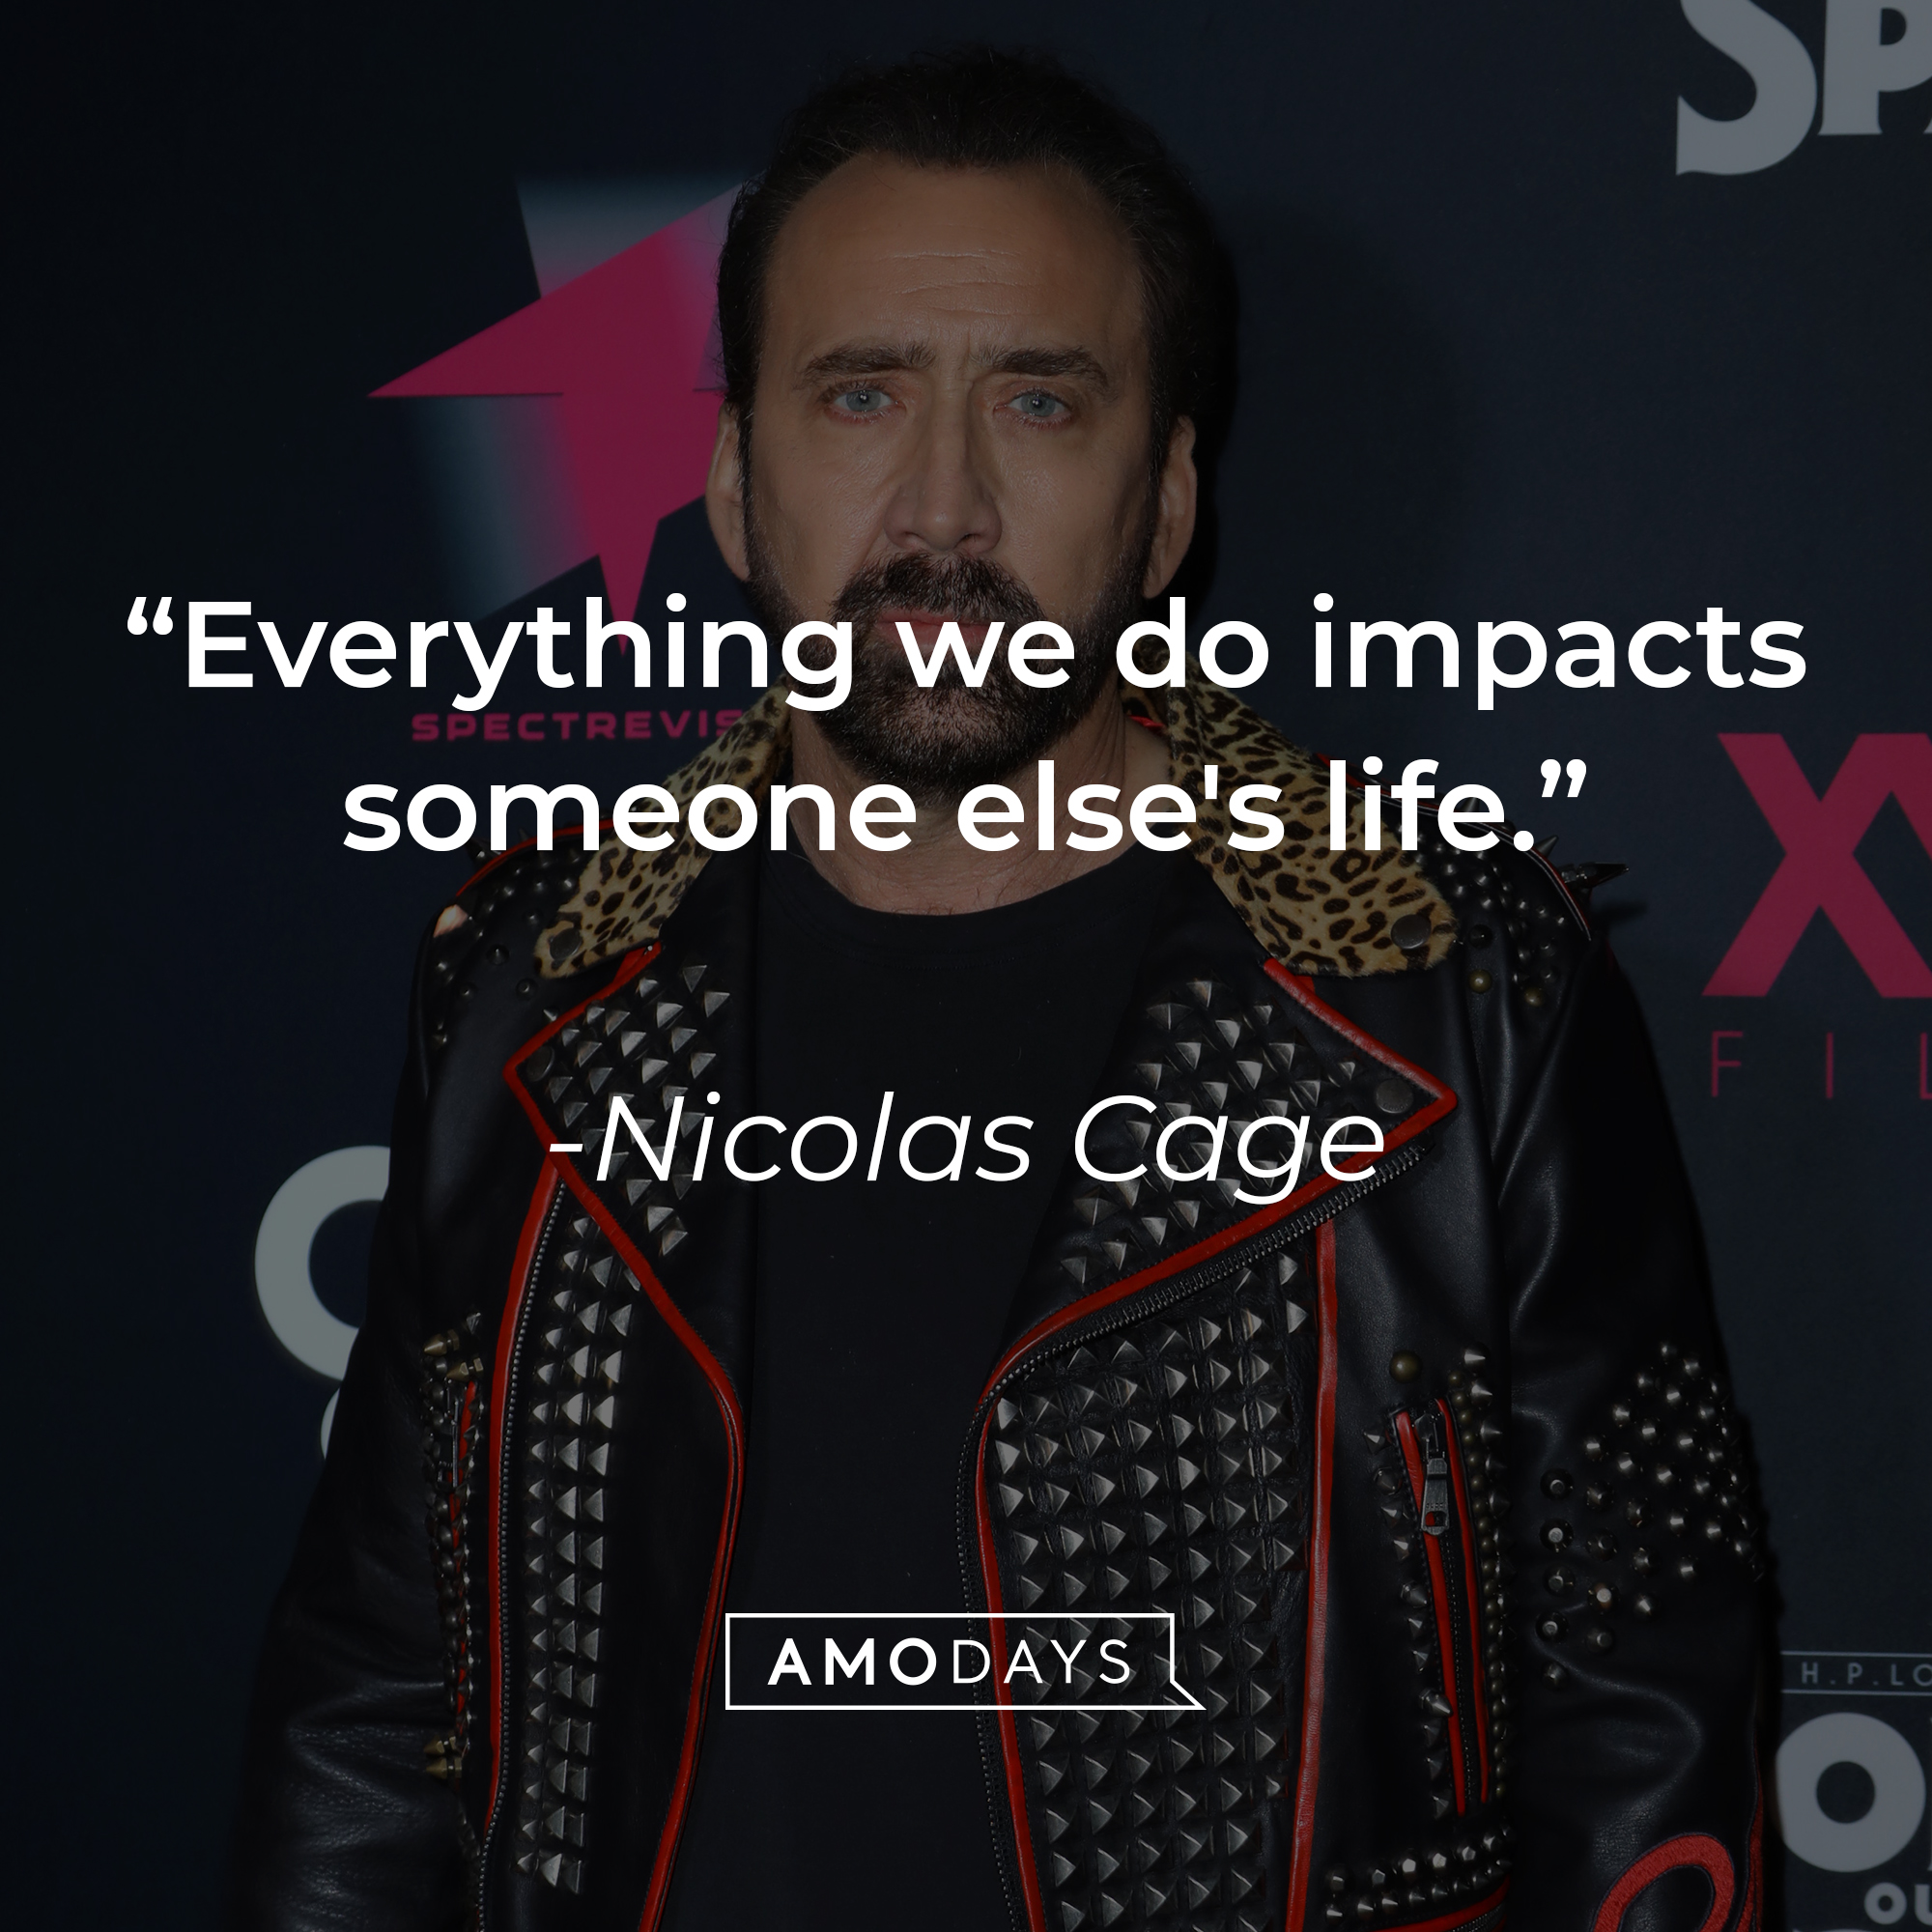 Nicolas Cage's quote: "Everything we do impacts someone else's life." | Source: Getty Images